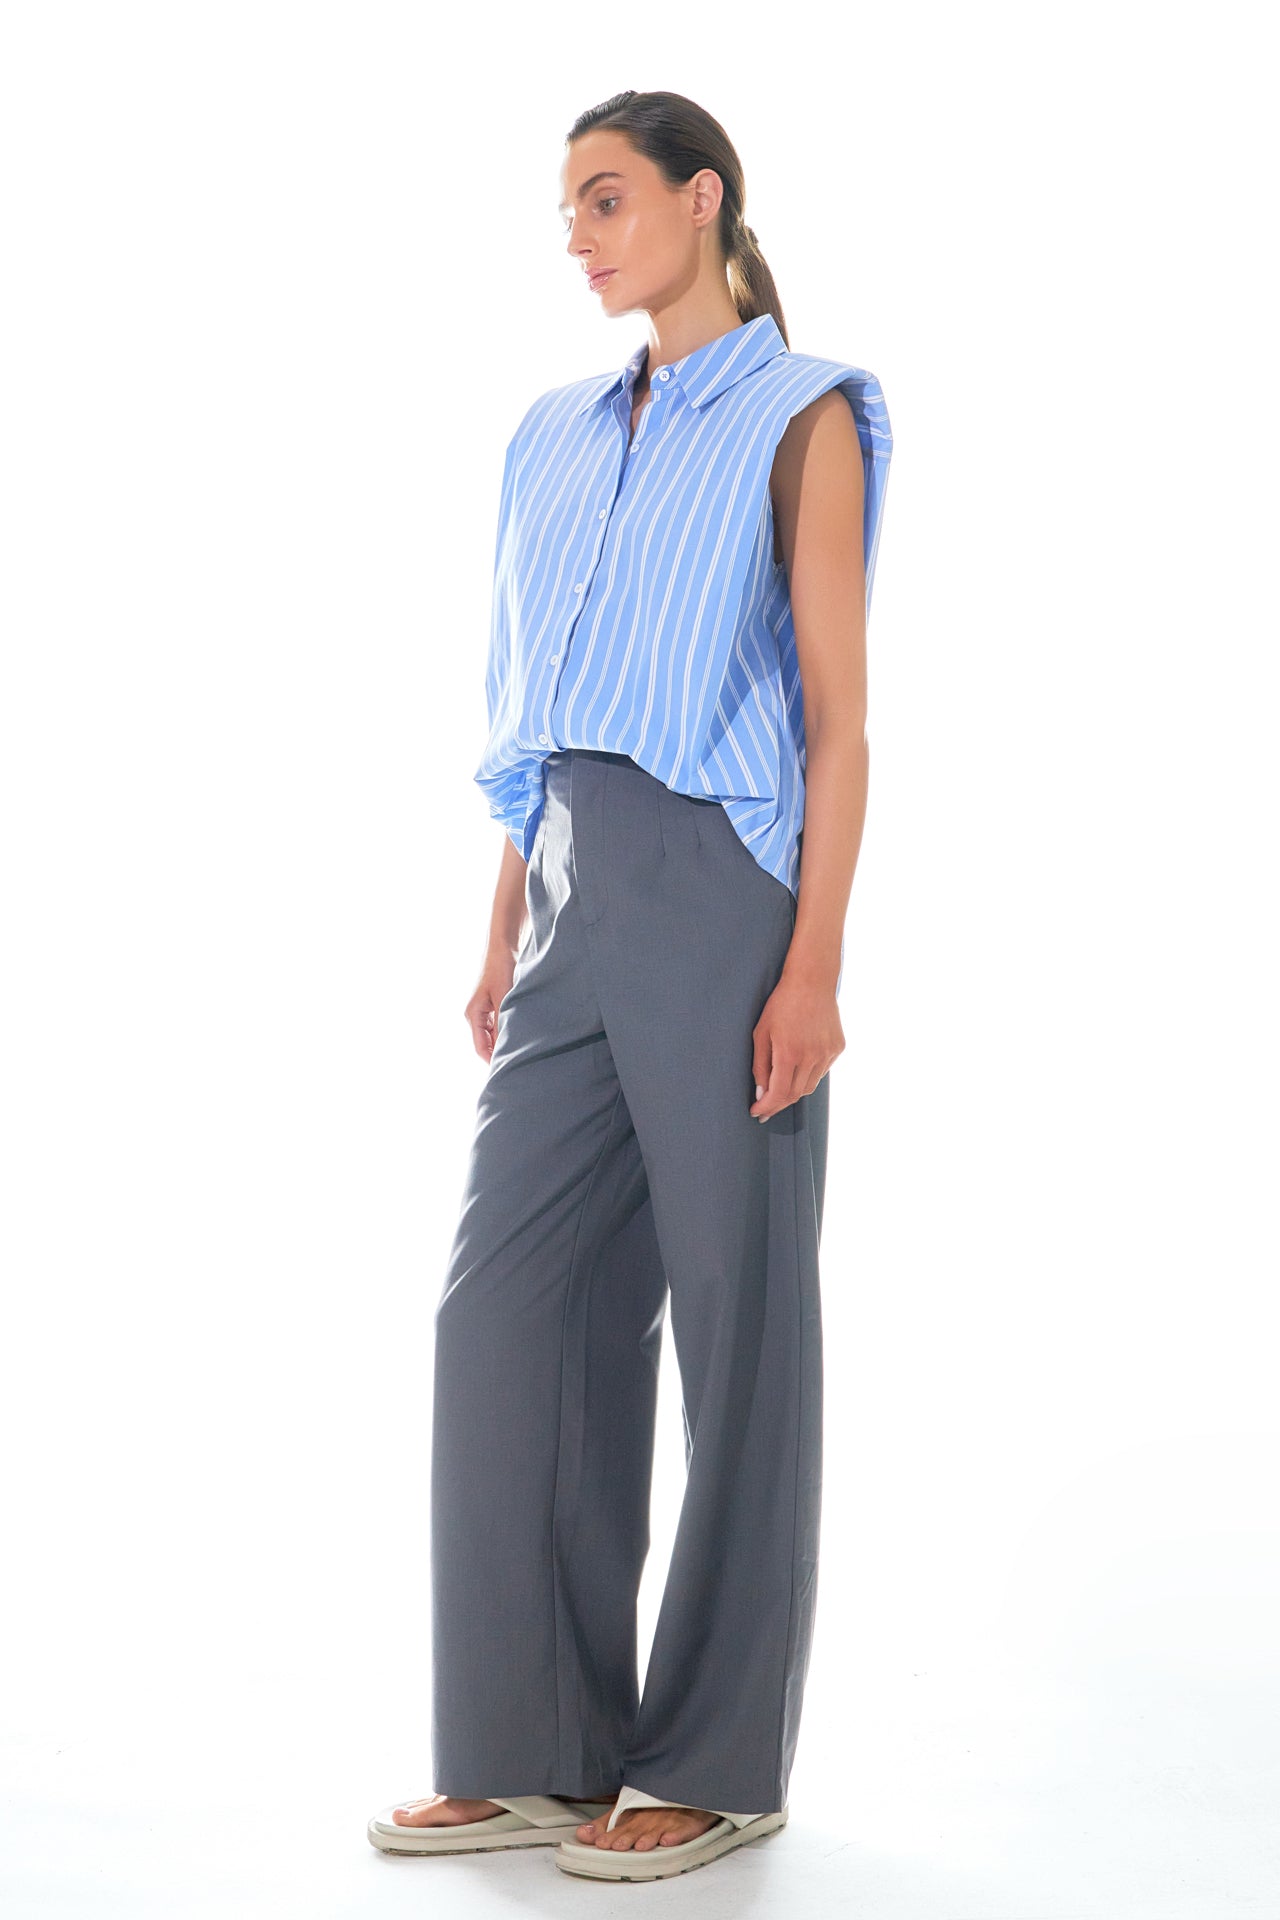 GREY LAB - High Waist Relaxed Pants - PANTS available at Objectrare